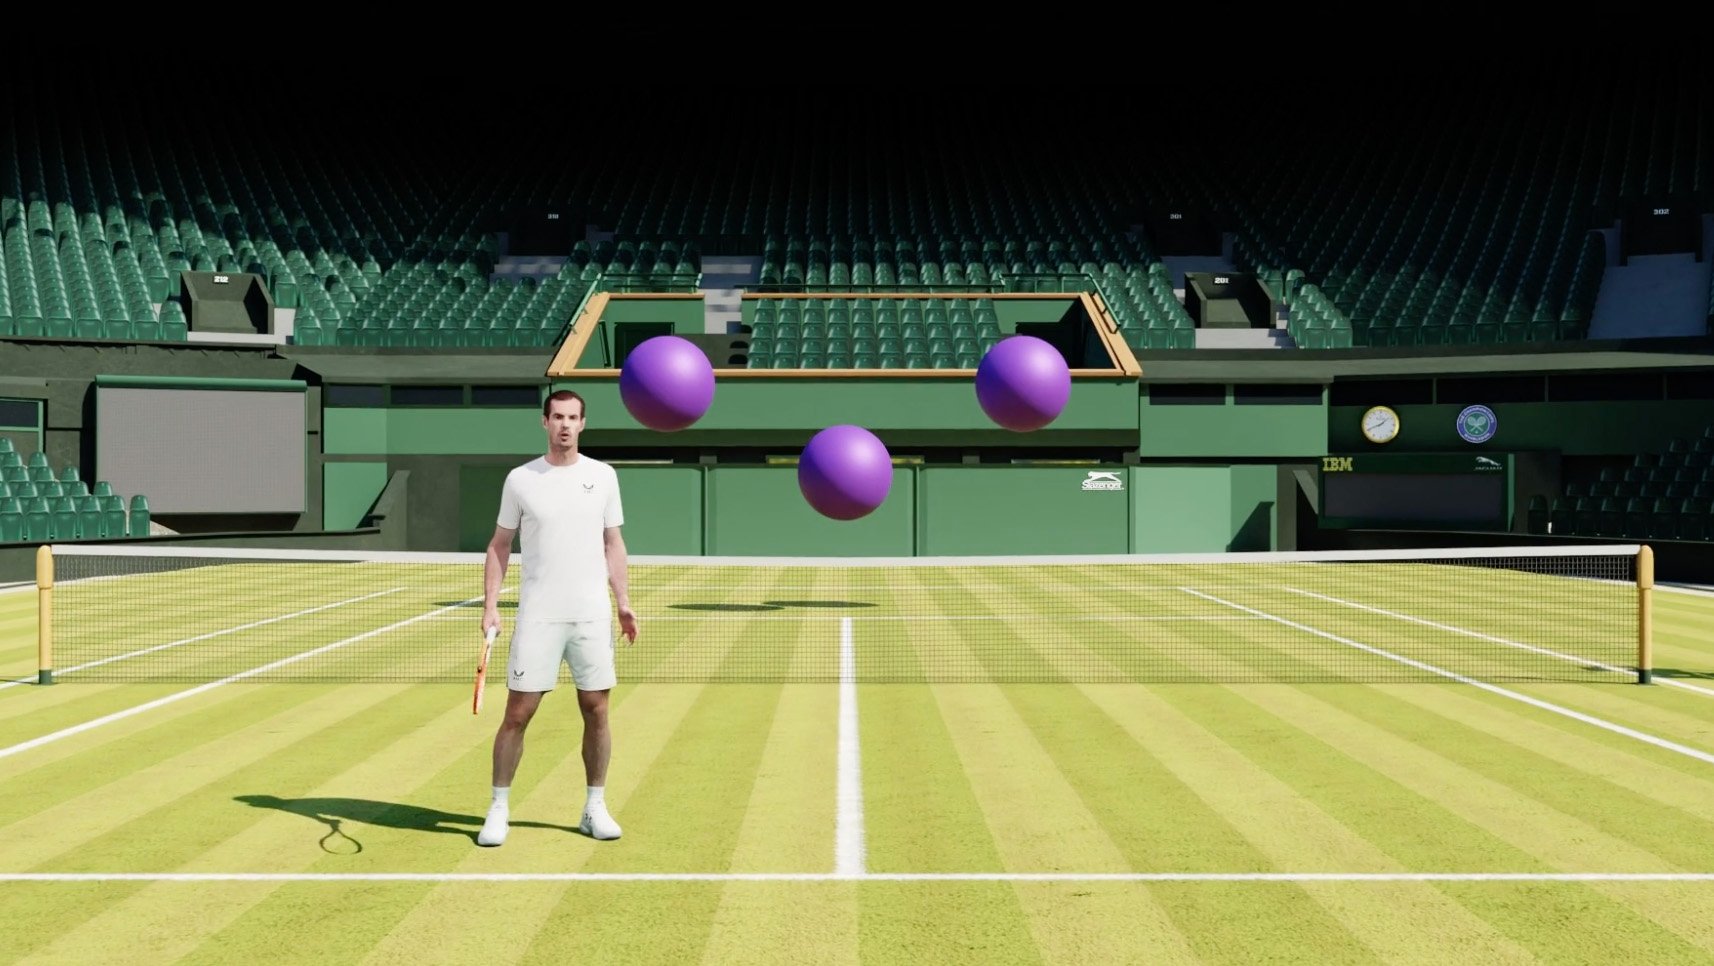 Hologram of tennis champ Andy Murray challenges you to beat his score in a WebAR game by American Express